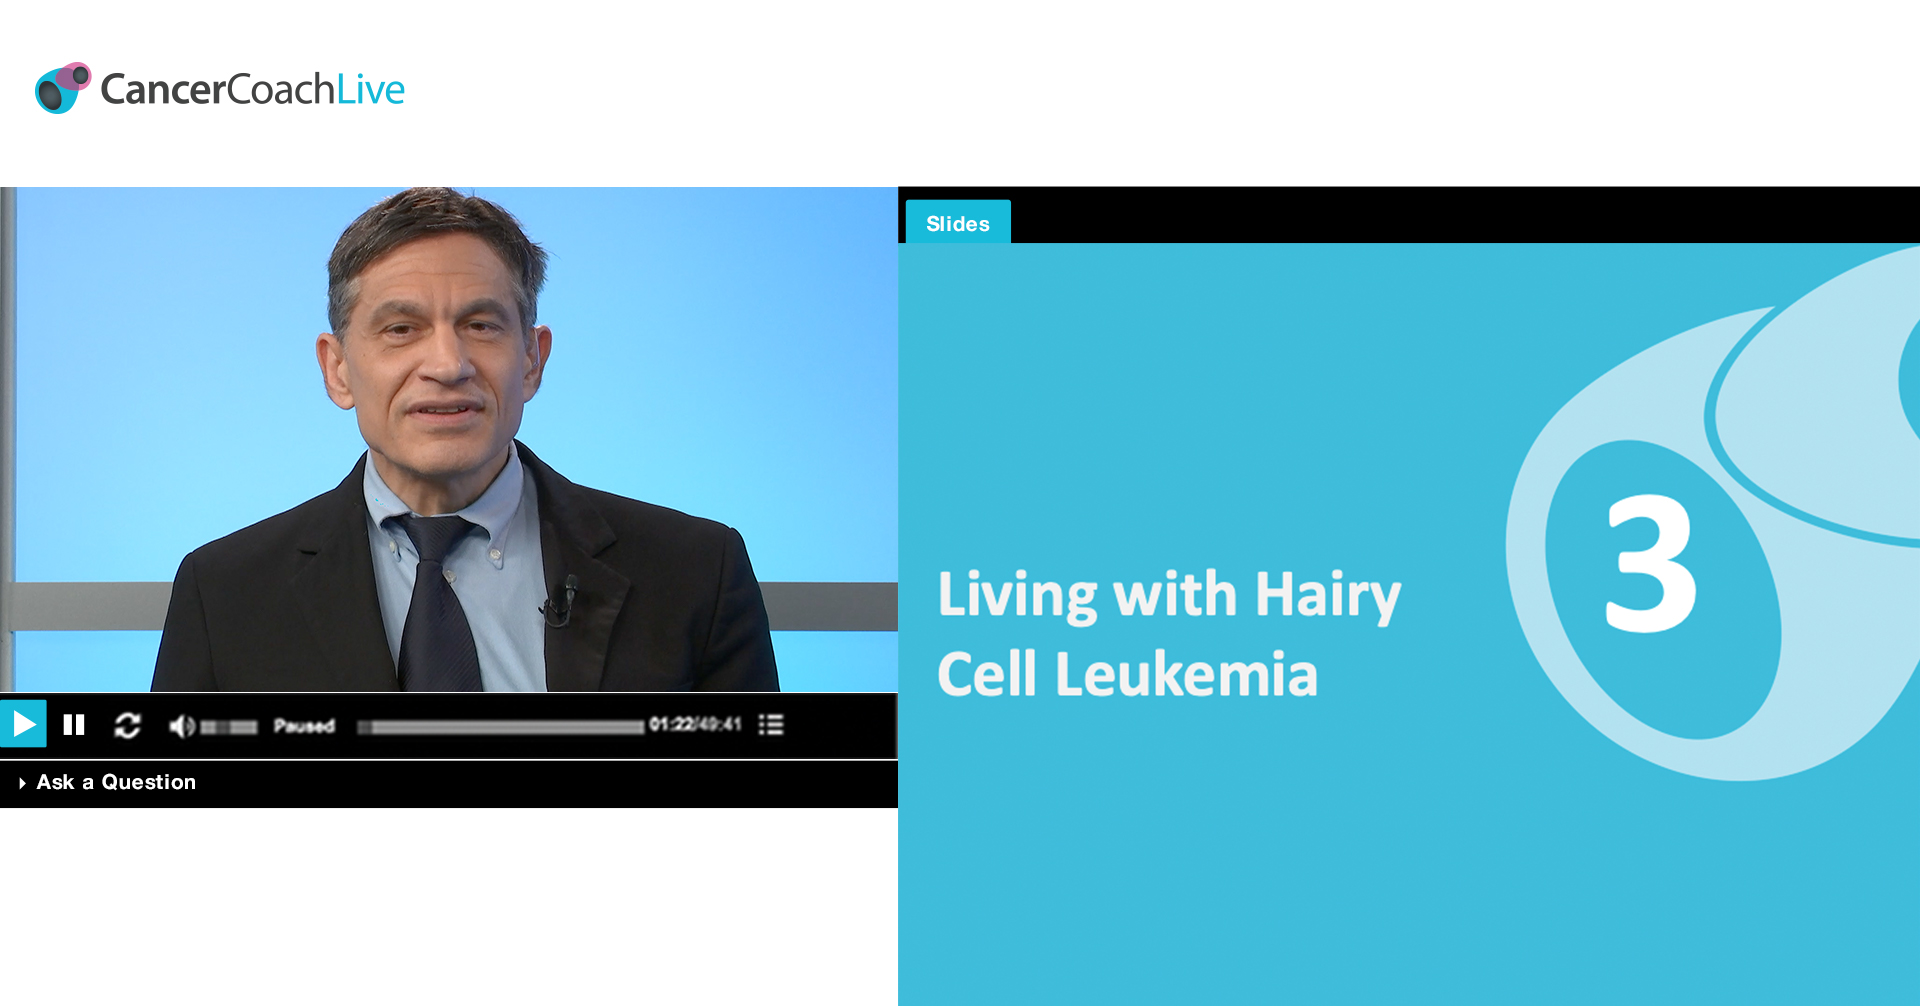 Chapter 3: Living with Hairy Cell Leukemia